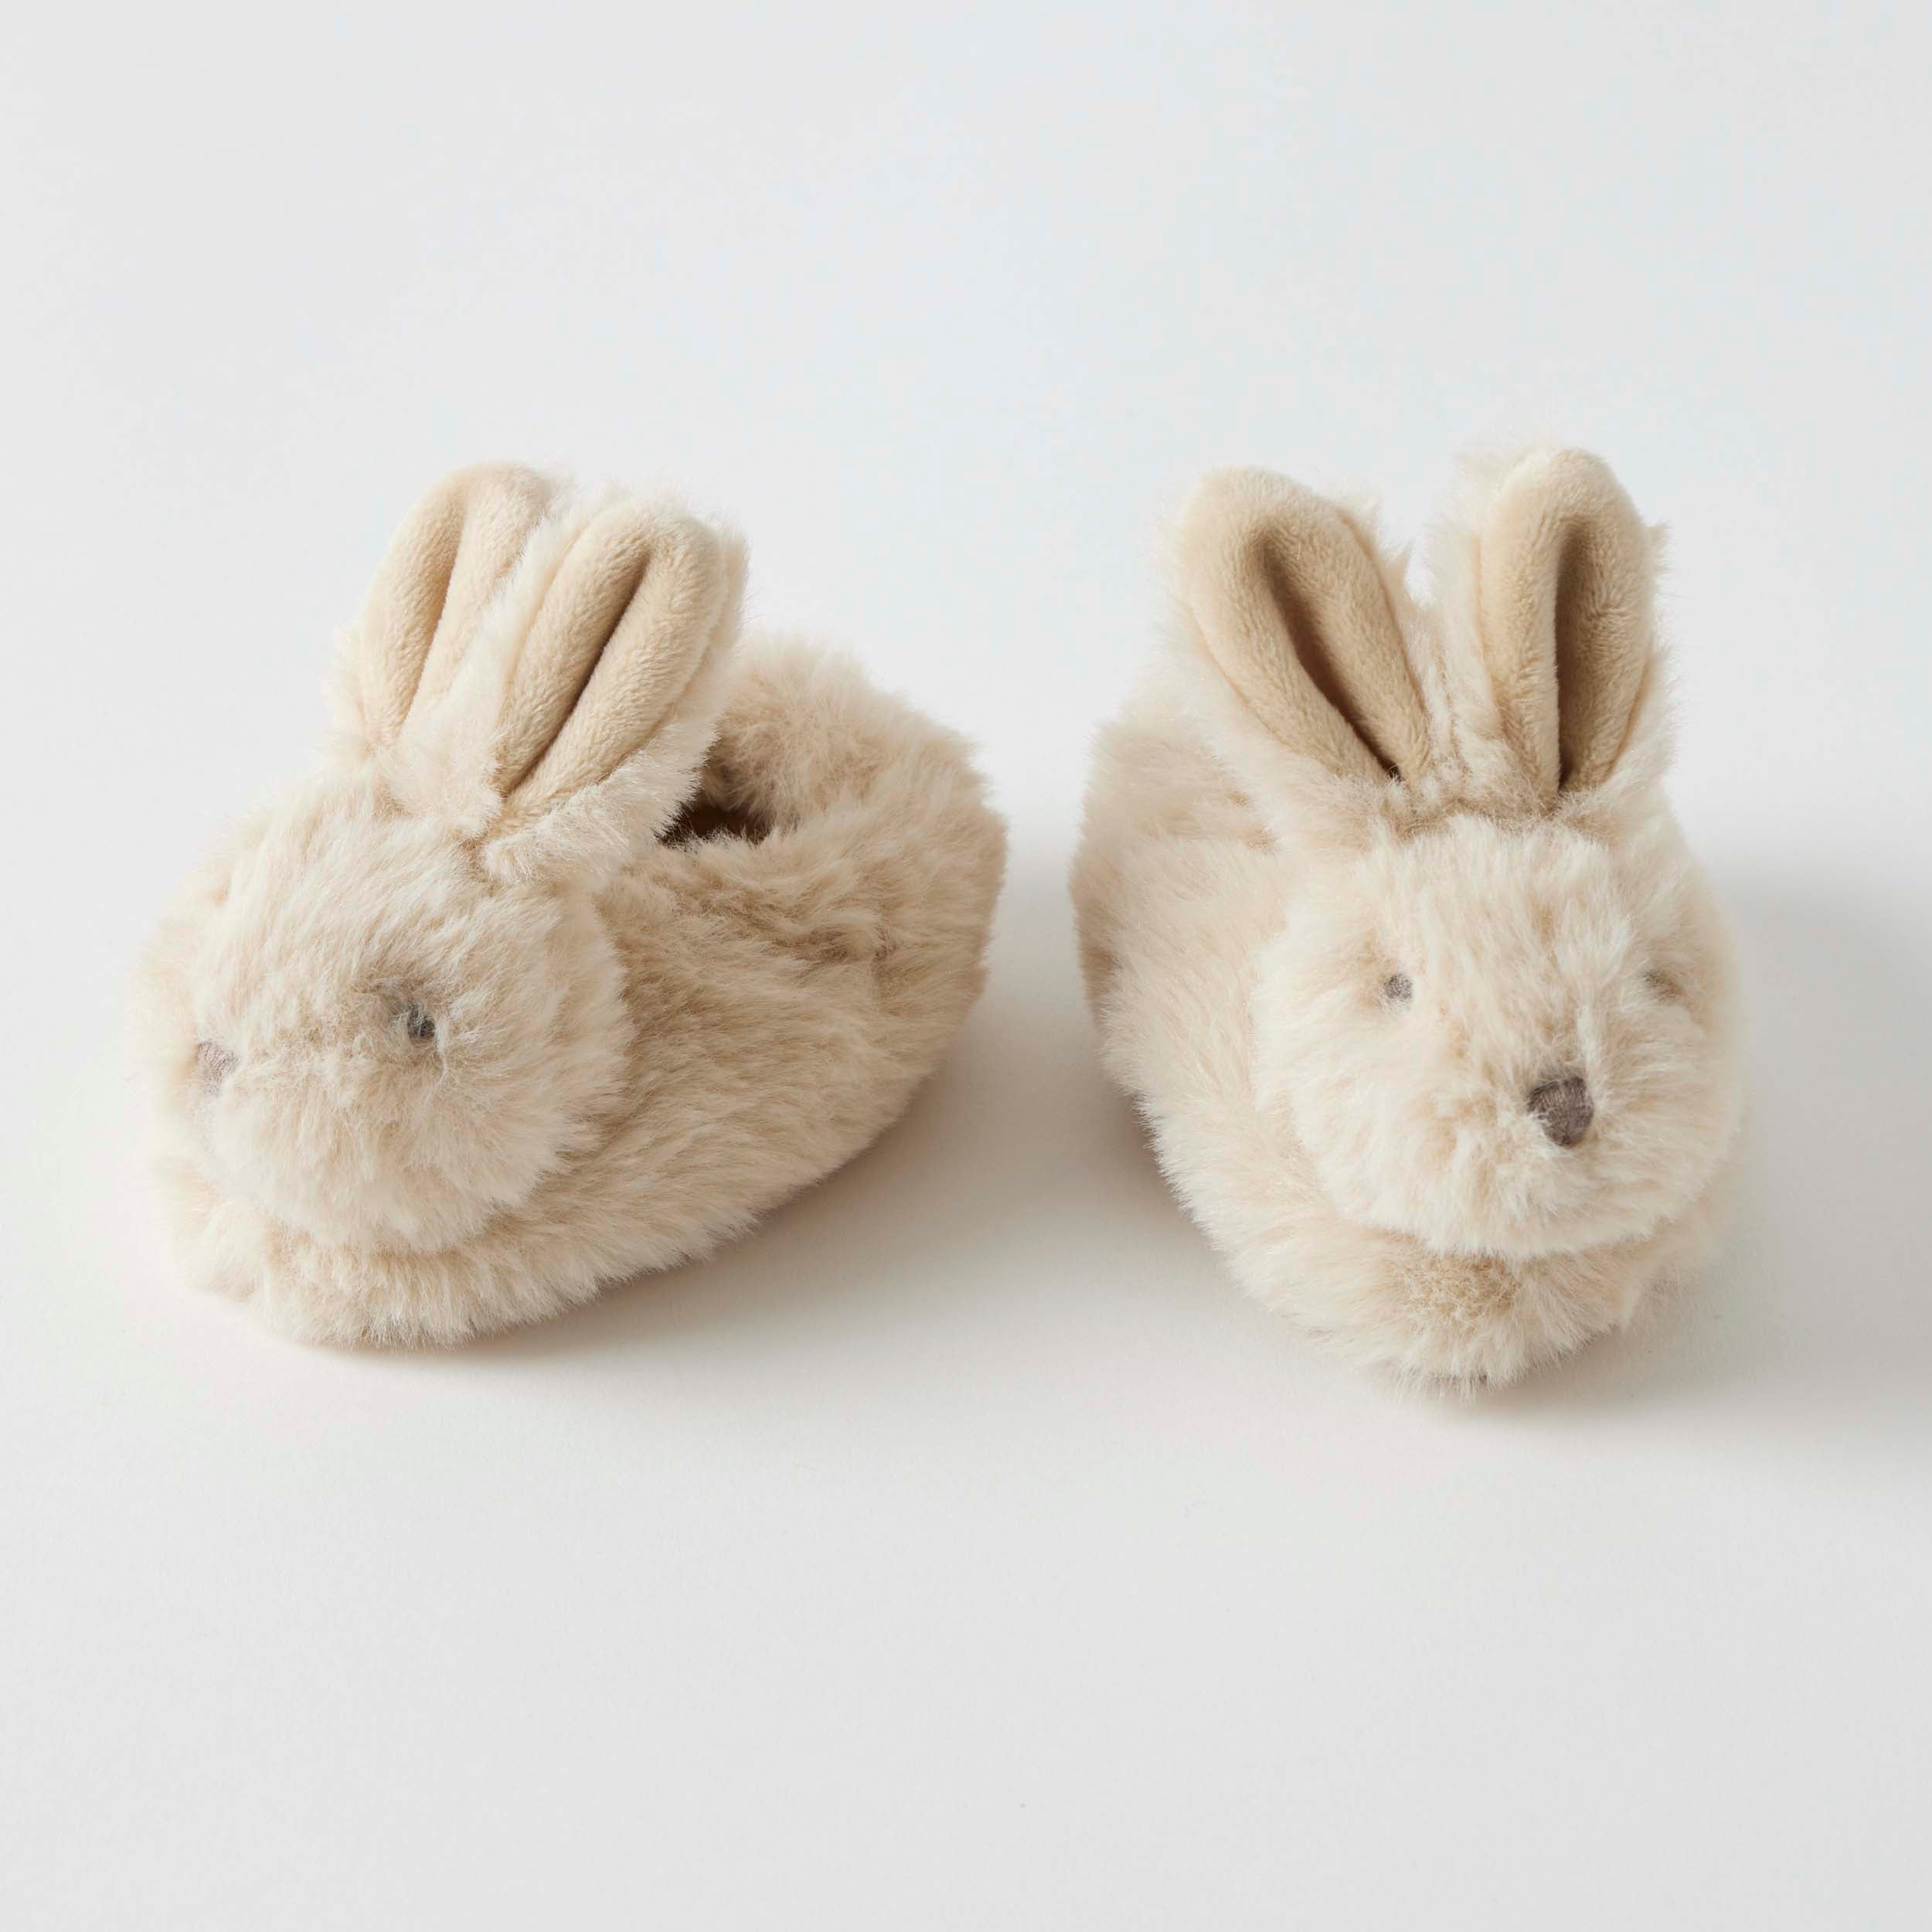 Some Bunny Loves You Beige Booties-Shoes & Socks-Pilbeam Living-The Bay Room